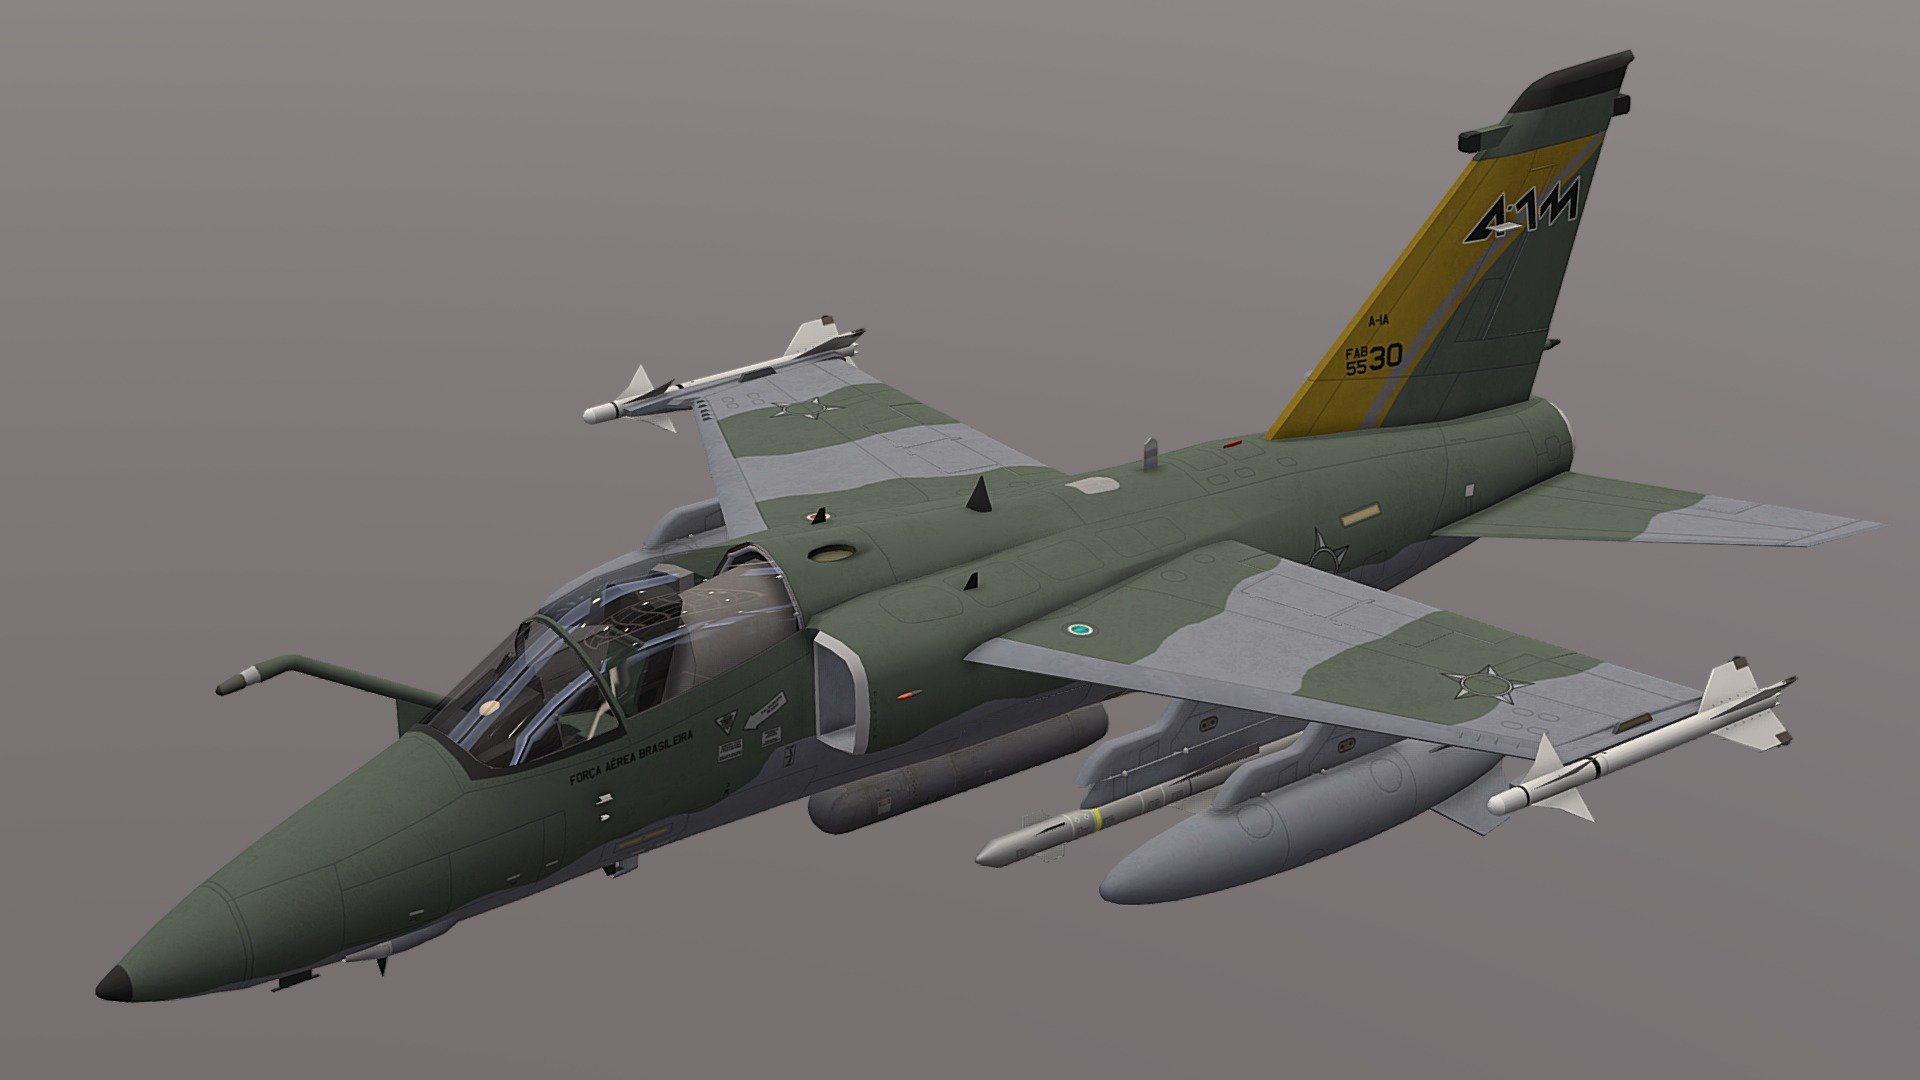 The AMX is capable of operating at high subsonic speeds at low altitude , both day and night, and if necessary, from poorly equipped bases or with damaged runways. The fighter has a relatively low infrared signature and reduced radar frontal section to improve its mission success rate.

Ace Combat 7: Skies Unknown ( Aircraft Mod )

Original Model : Simaoelis
Revised Model : RythusOmega
Mod : RythusOmega - AMX A-1M Aermacchi / Embraer - 3D model by Simaoelis3D (@Simaoelis-3d) 3d model